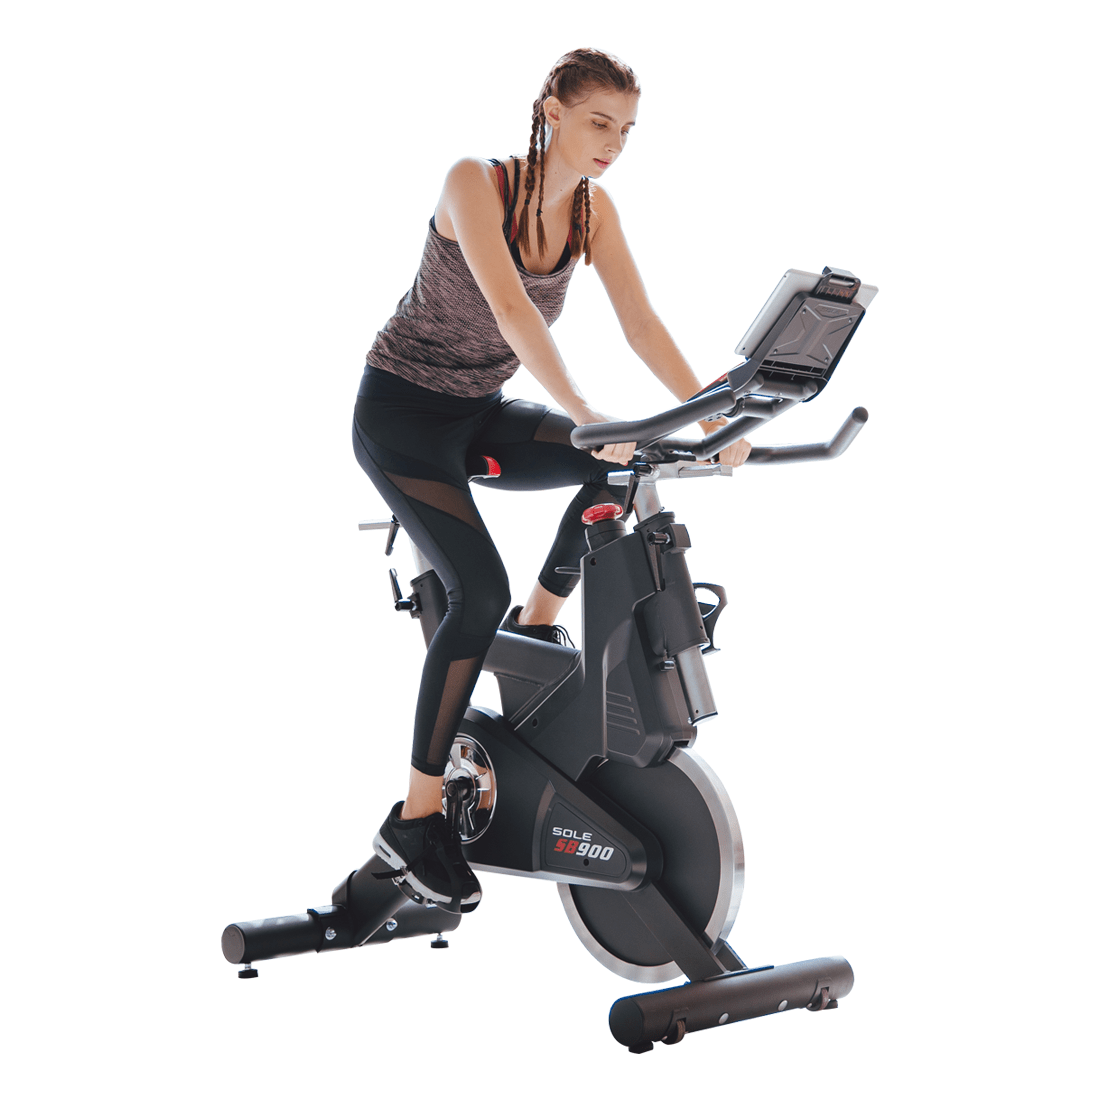 Sole SB900 Spin Exercise Bike - Display Unit